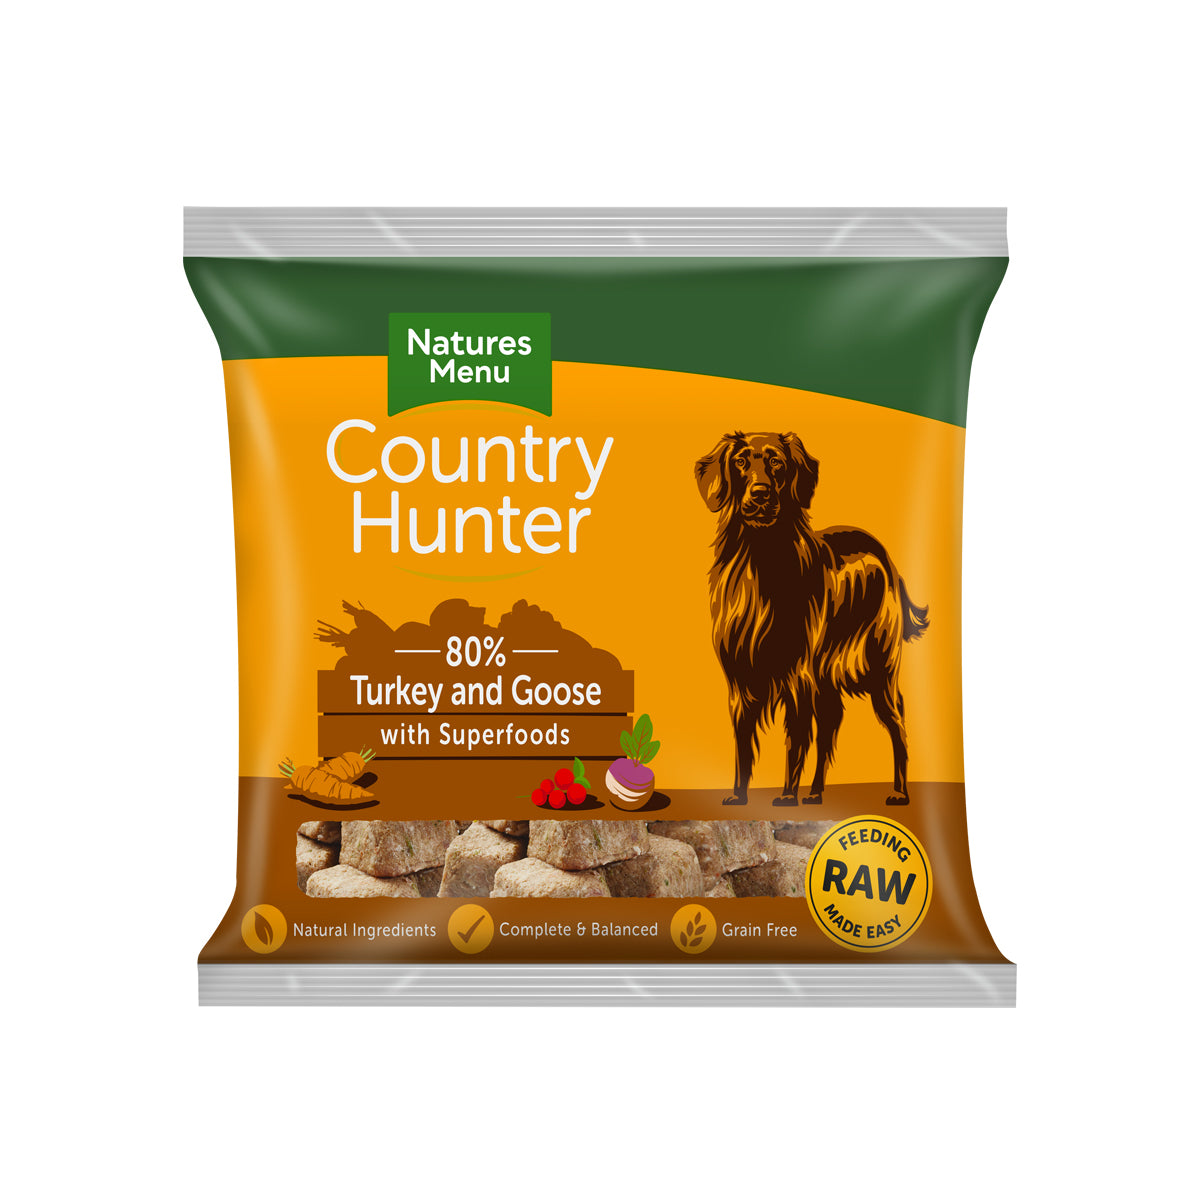 Natures Menu Country Hunter Raw Nuggets Turkey And Goose For Dogs 1kg